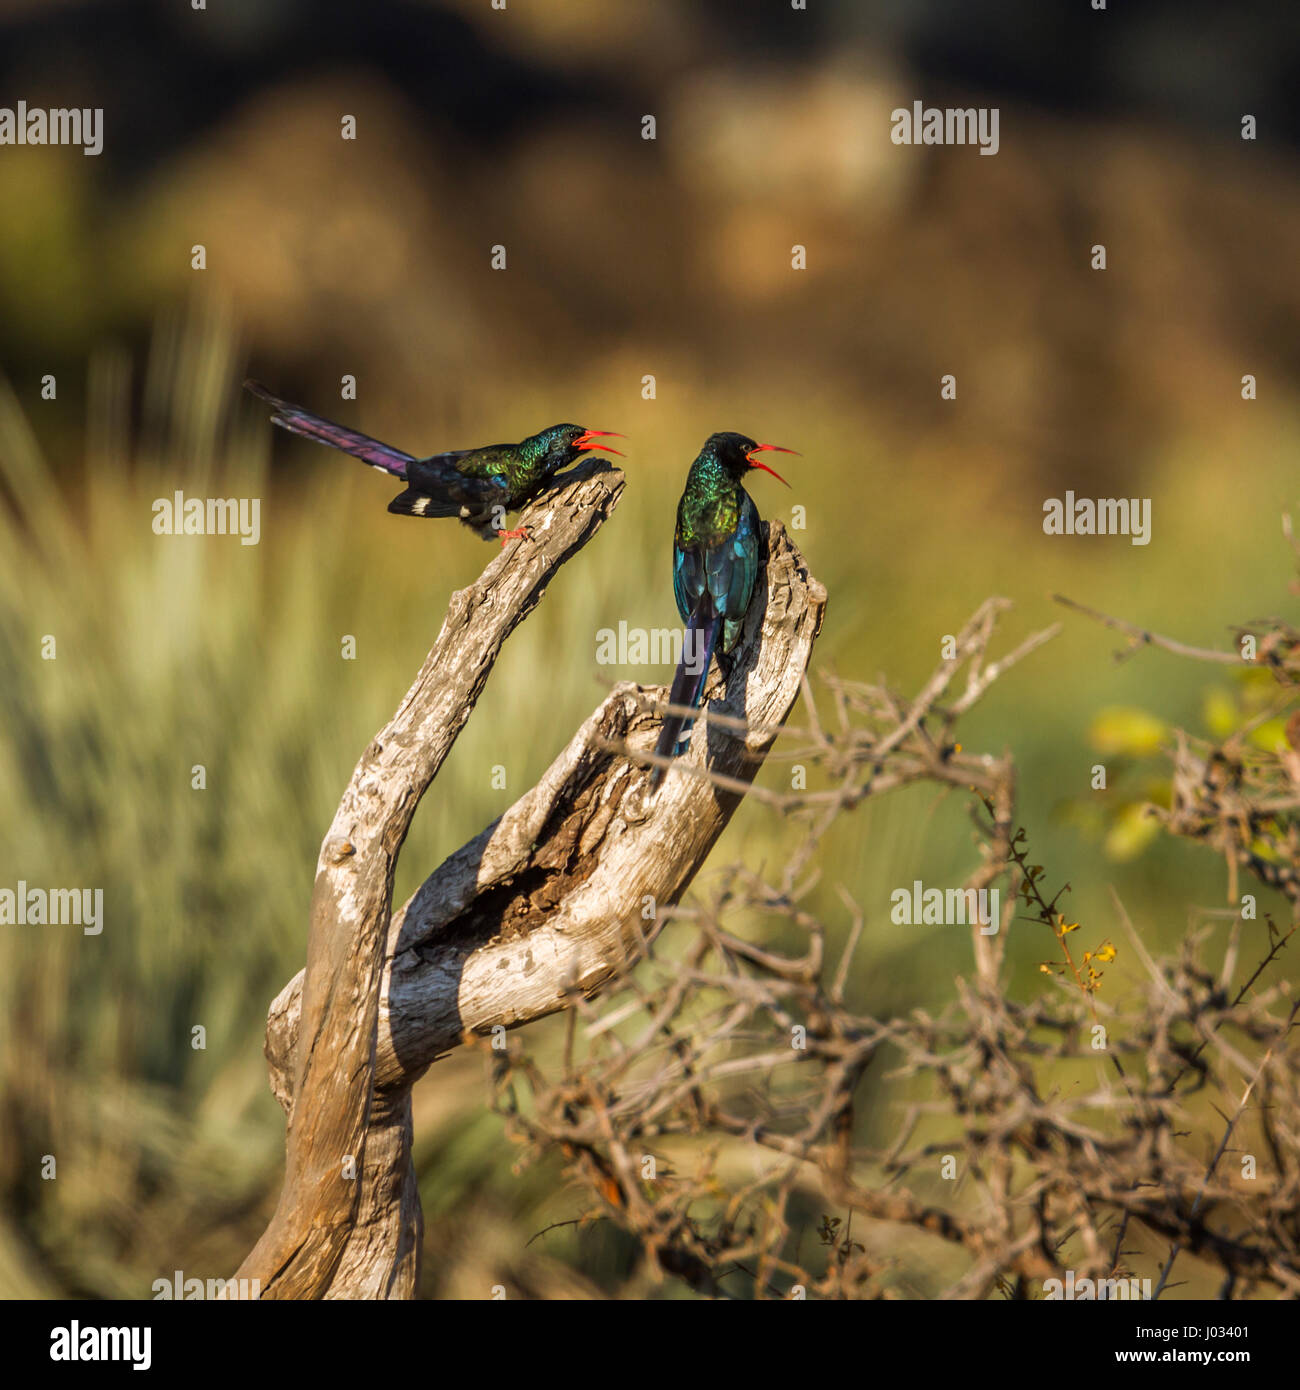 Green wood-hoopoe in Kruger national park, South Africa ; Specie Phoeniculus purpureus family of Phoeniculidae Stock Photo